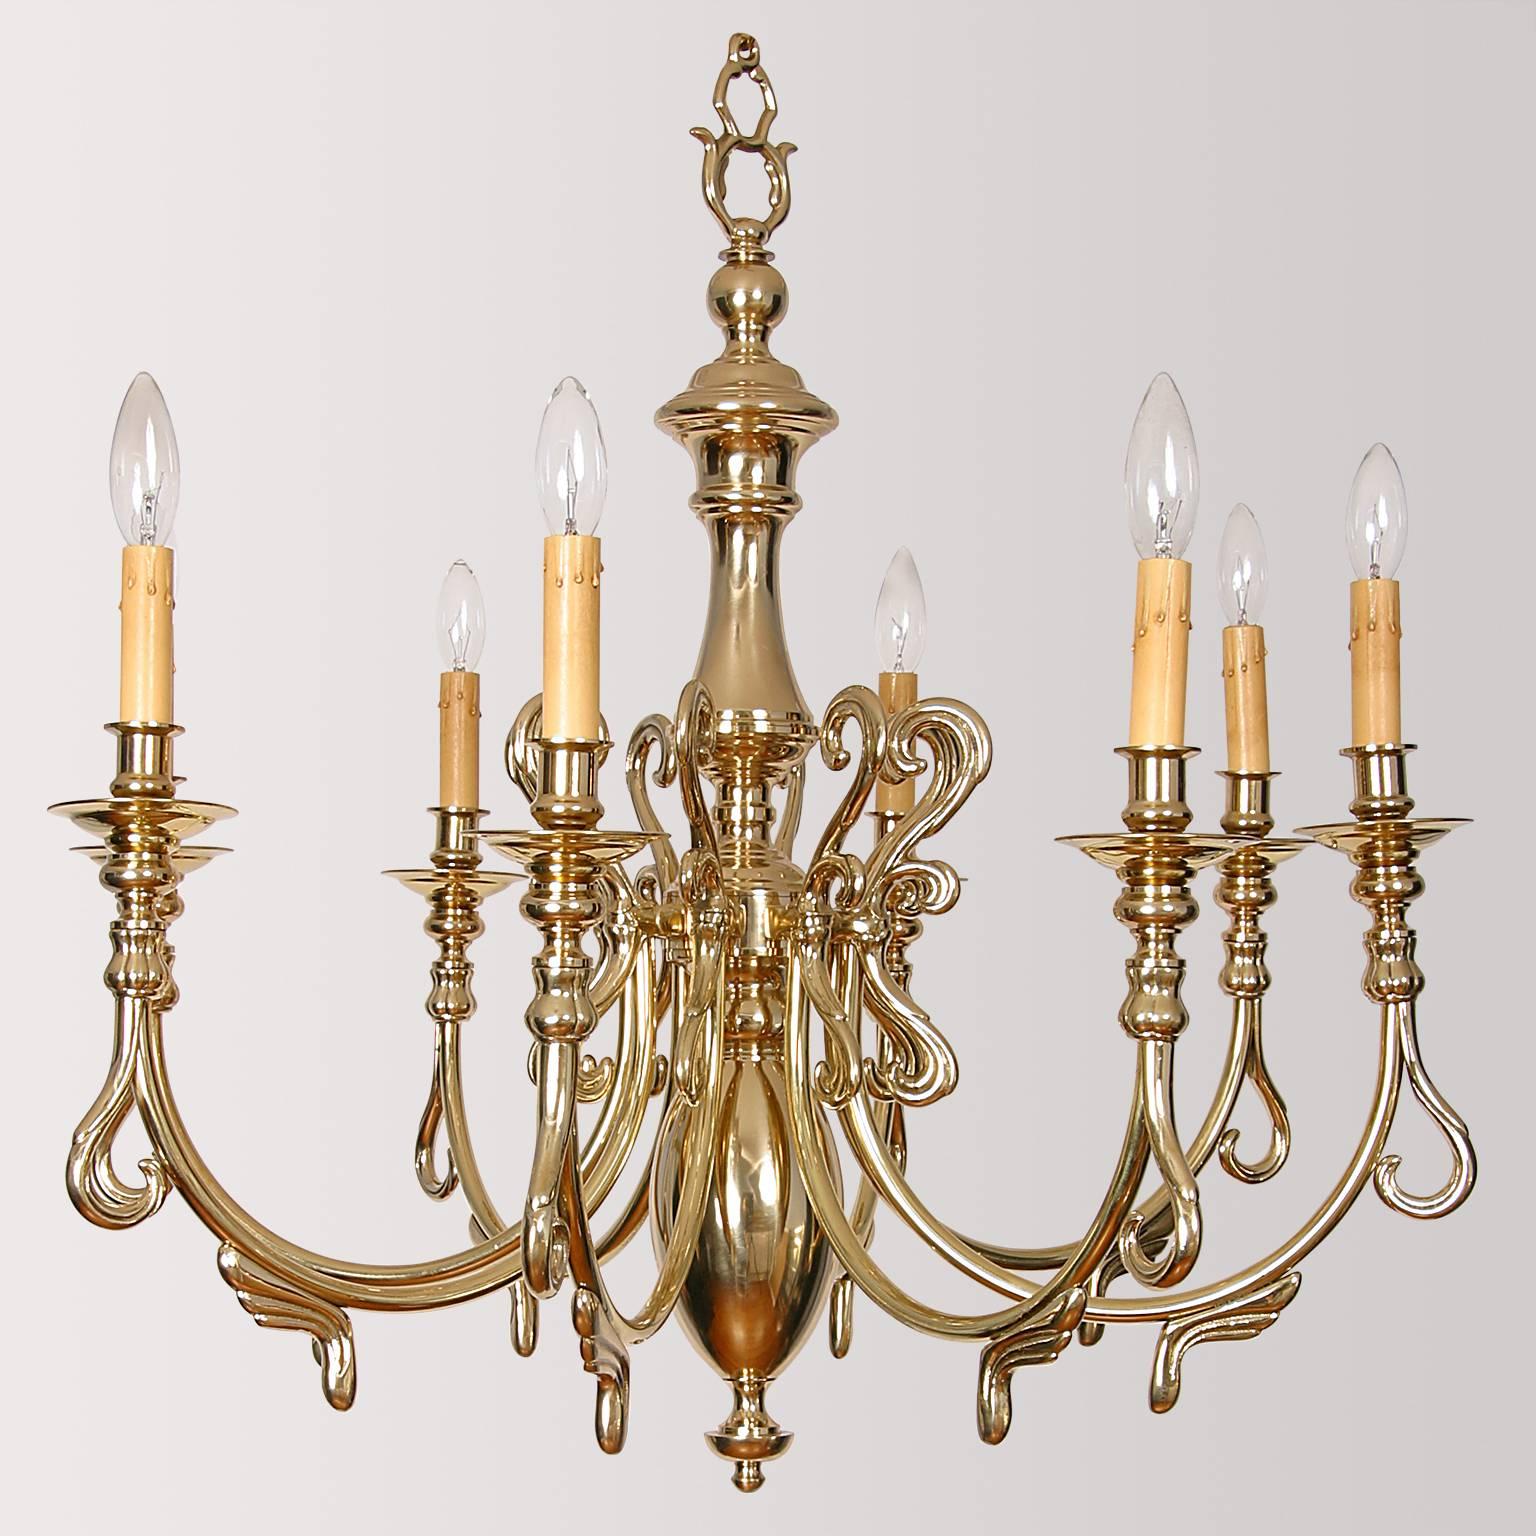 Eight-light, Mid-Century, Swedish chandelier, cast brass, fully restored and rewired to meet US standards.